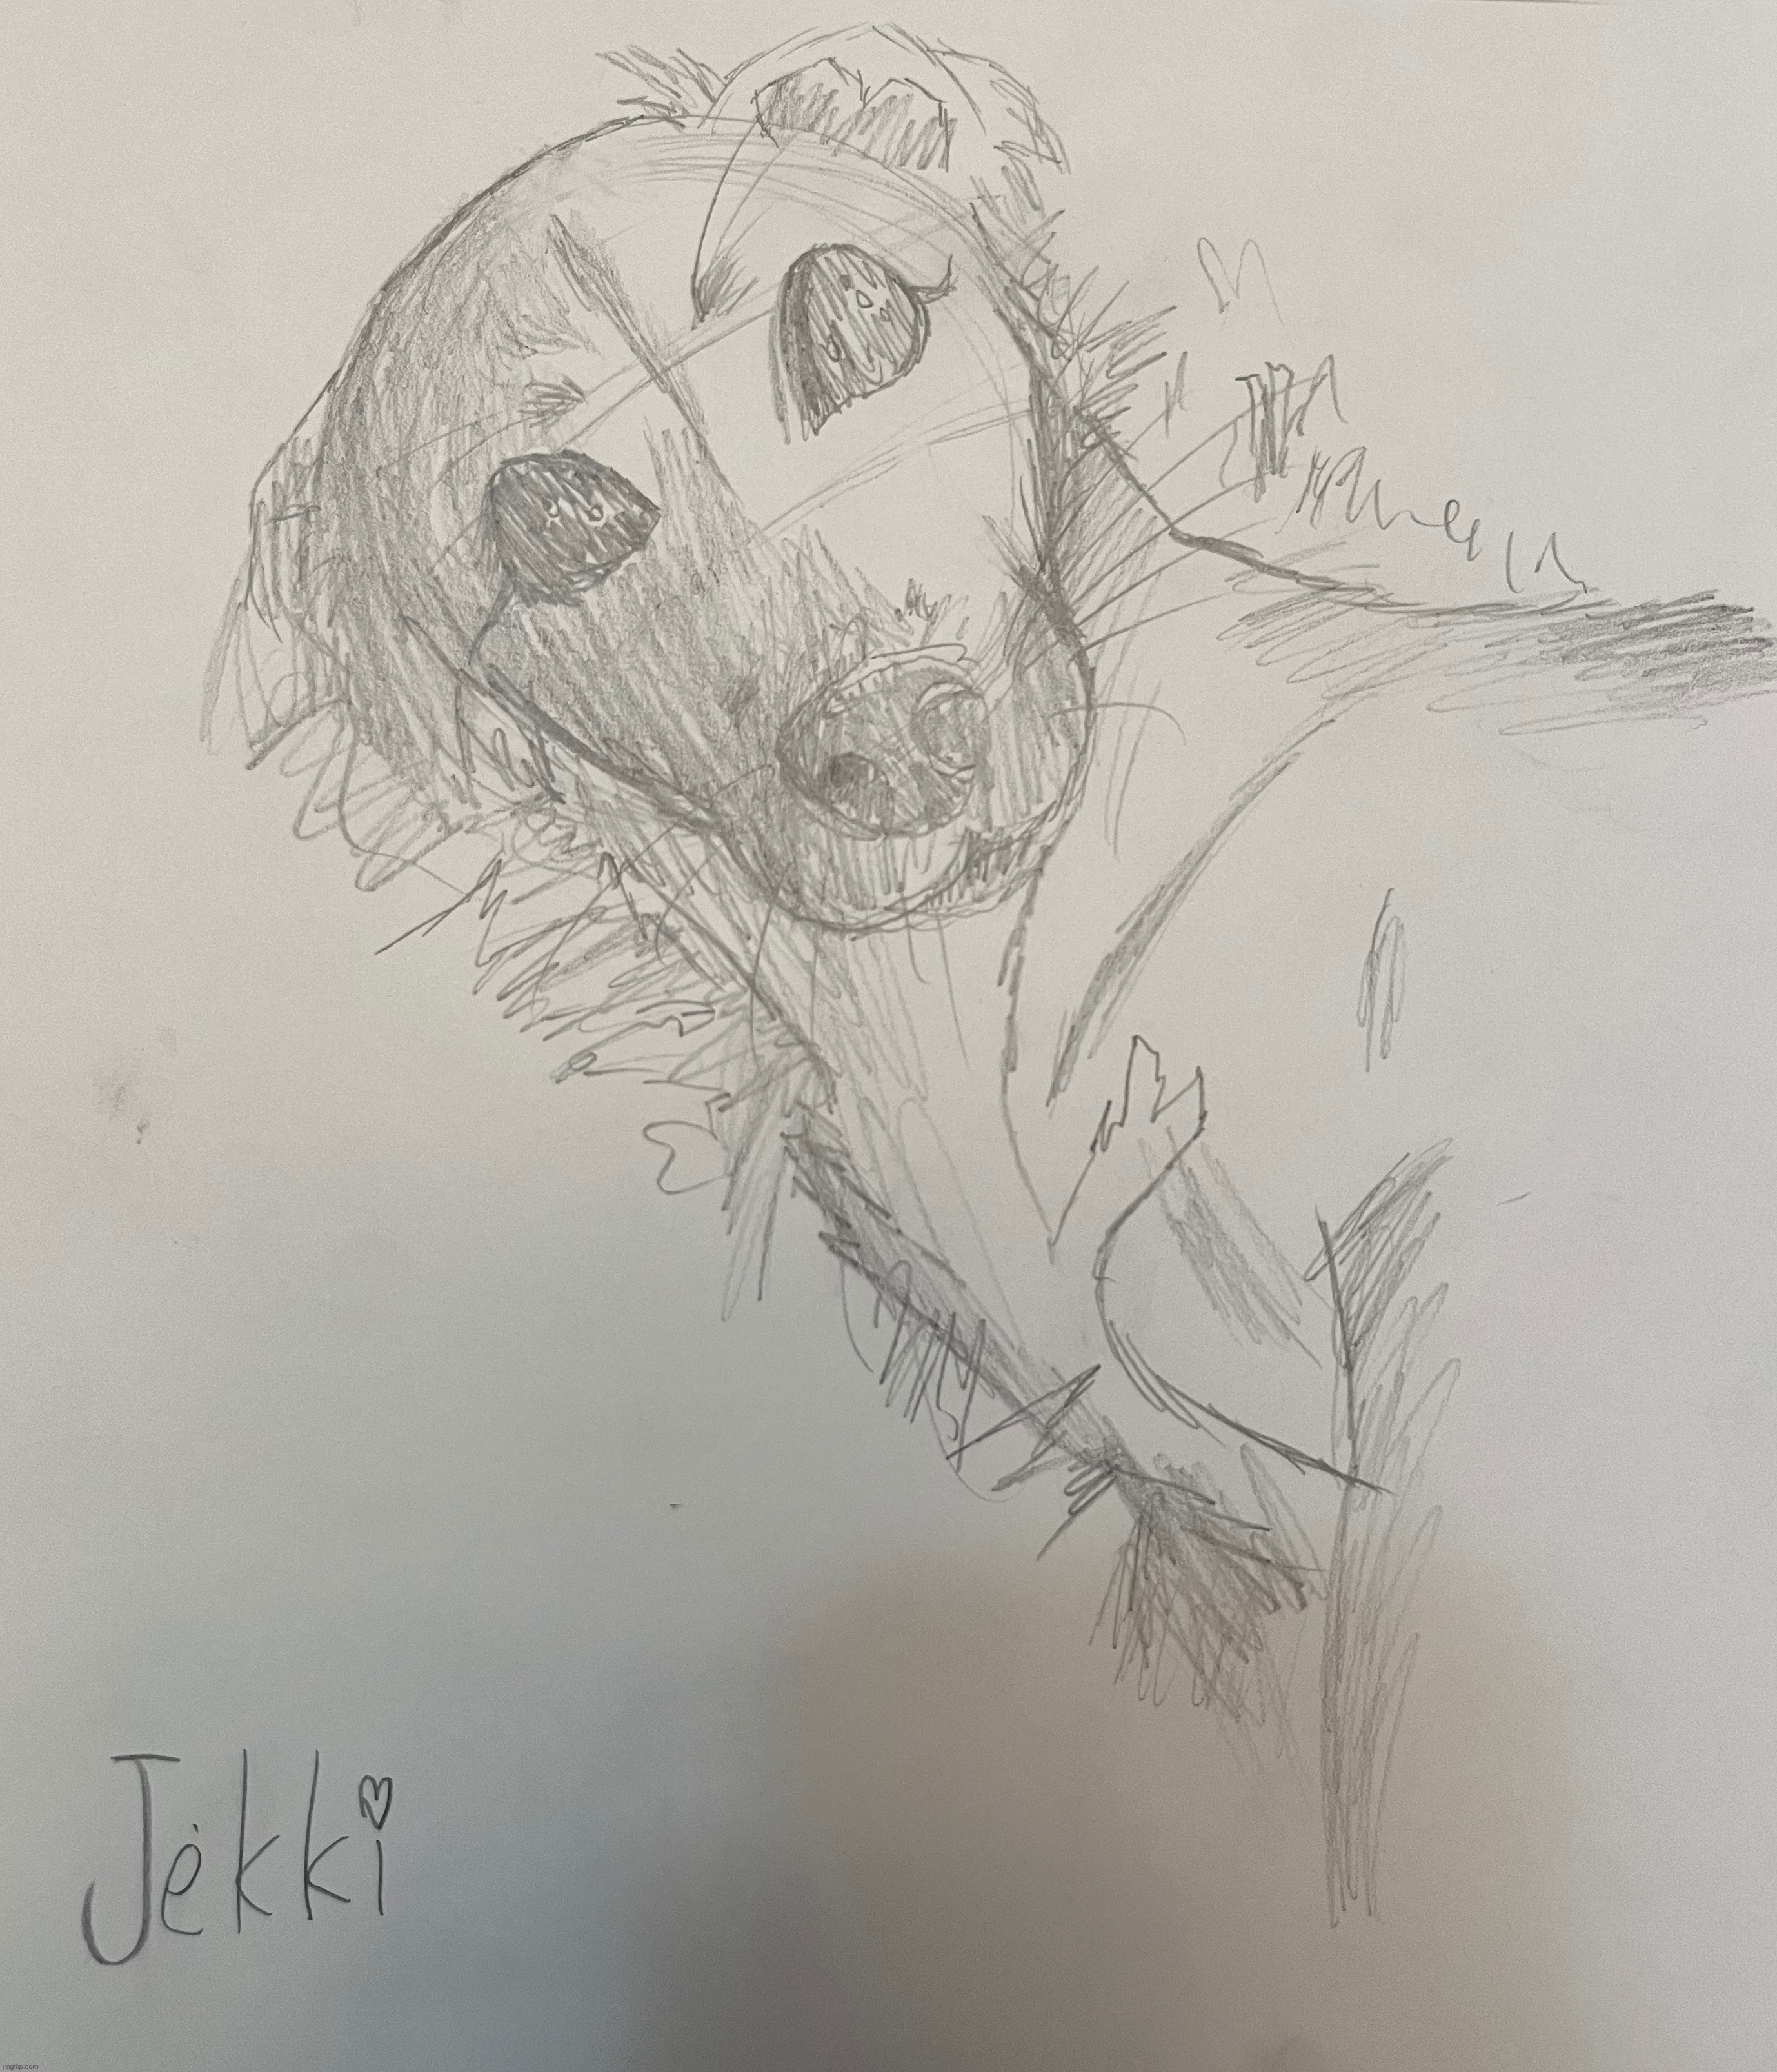 Sniff | image tagged in dog,drawing,drawings,puppy | made w/ Imgflip meme maker